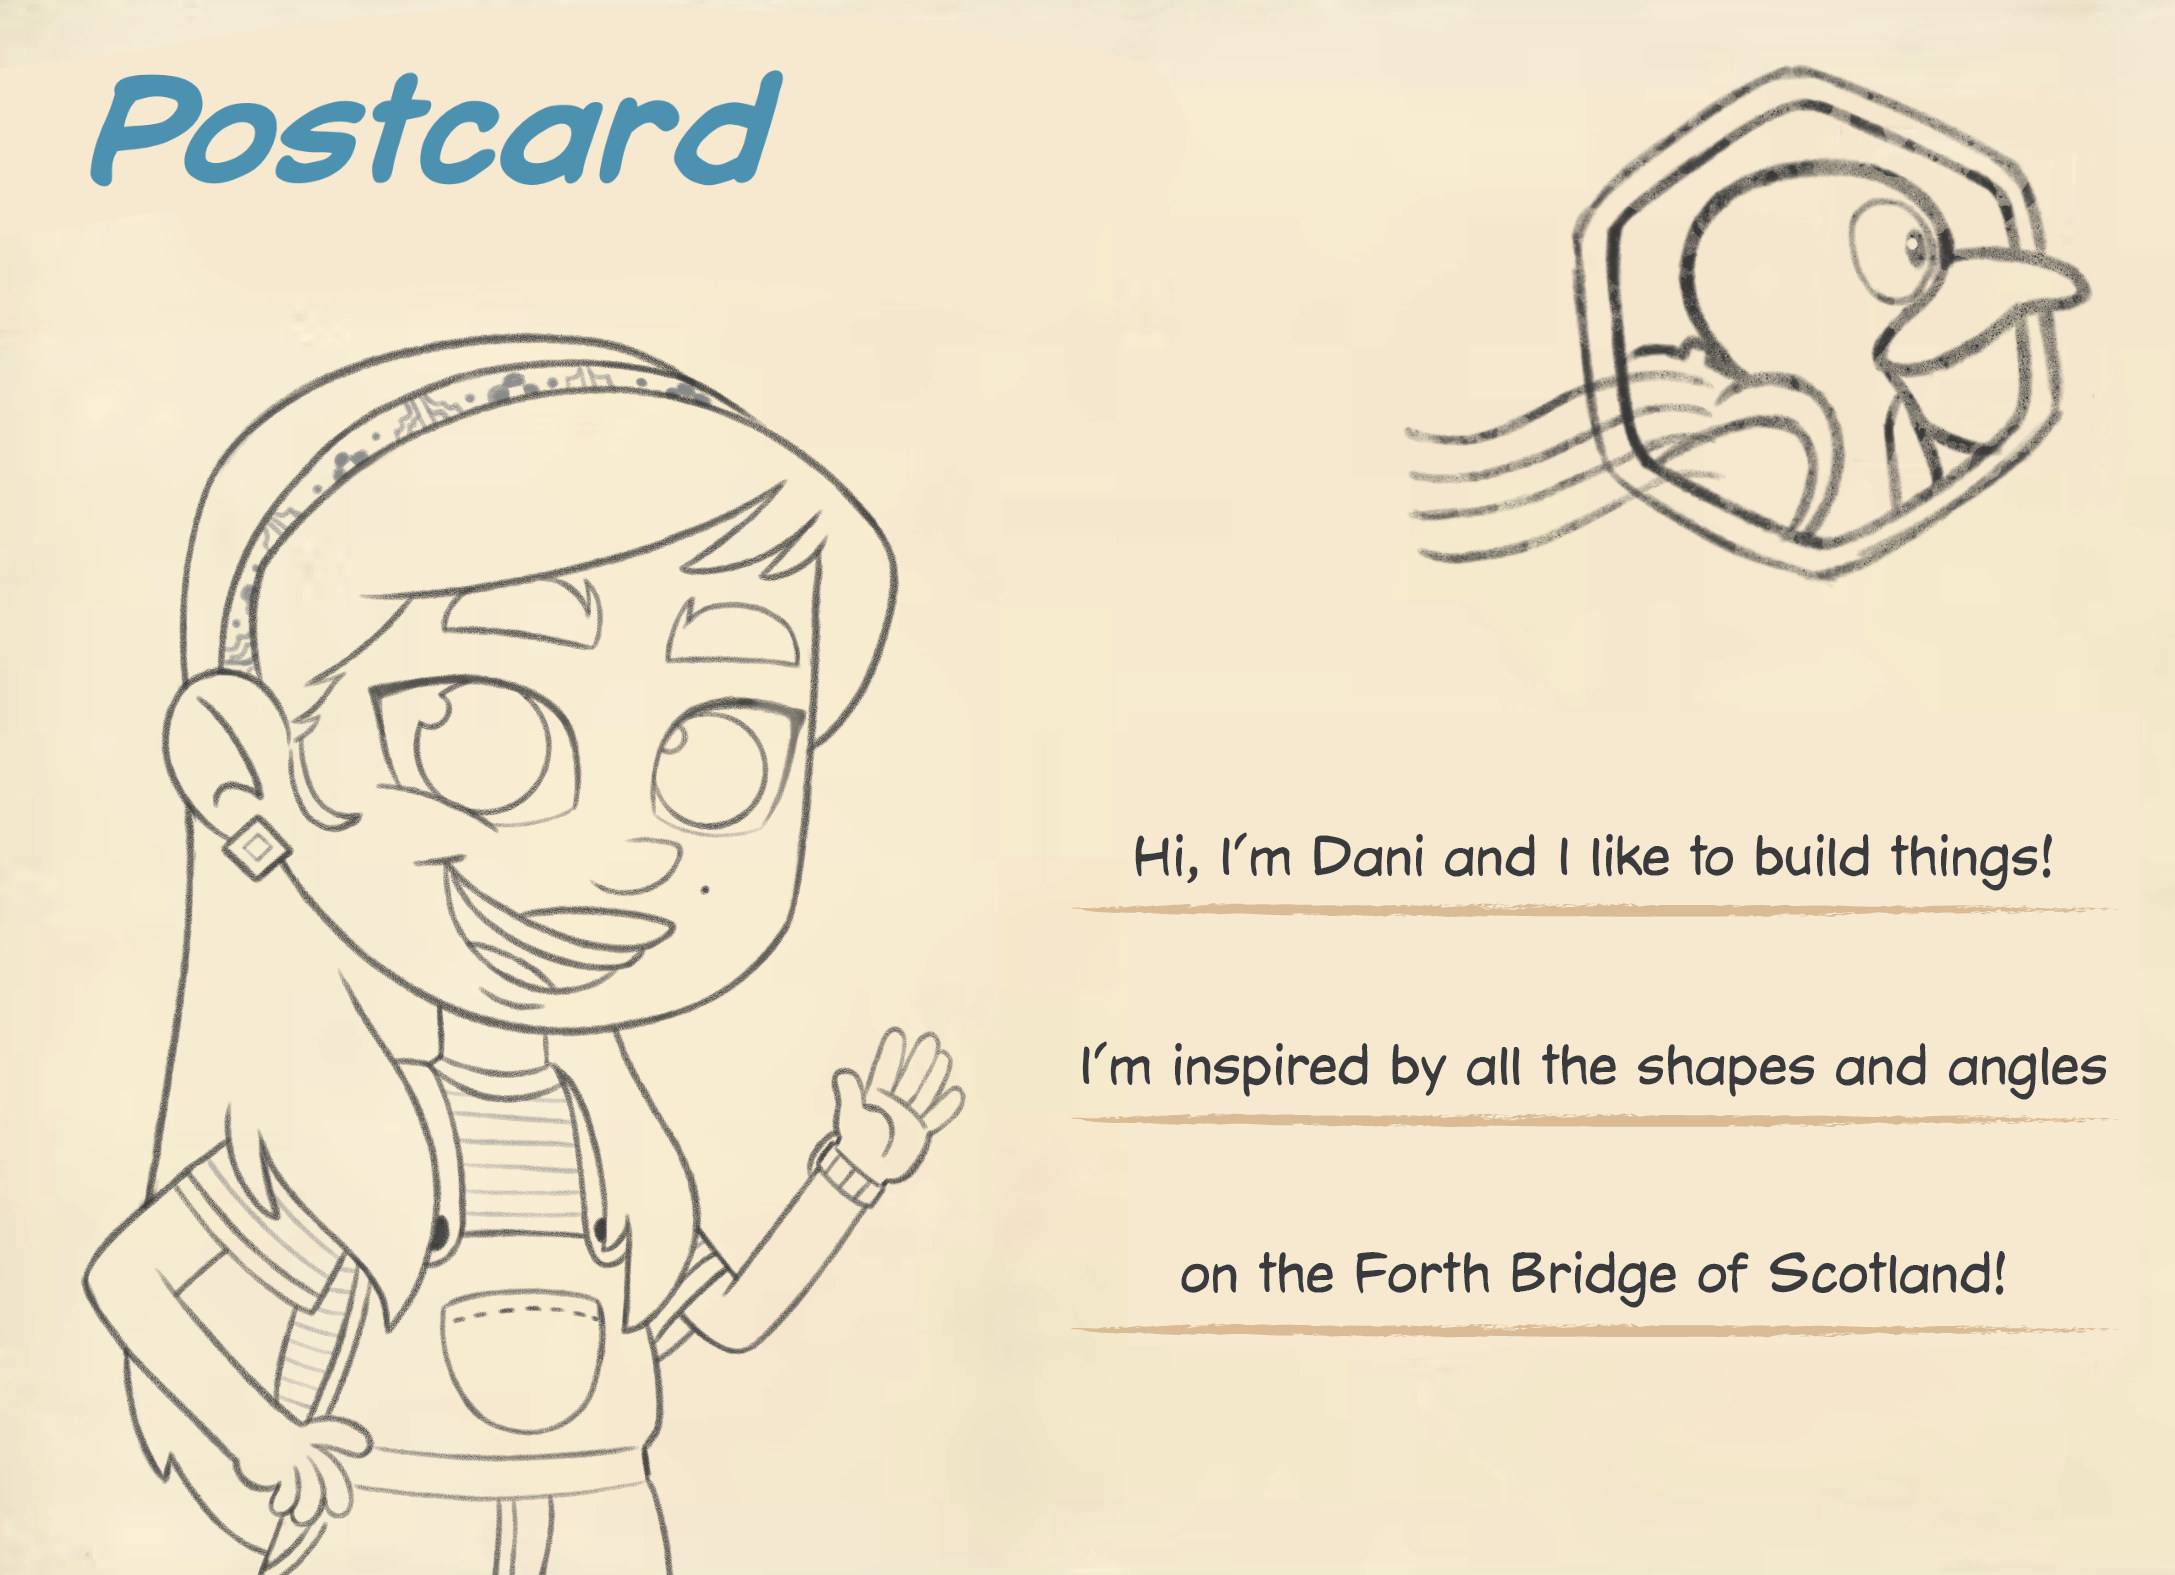 A postcard wtih Hi, I'm Dani and I like to build things! I'm inspired by all the shapes and angles on the Forth Bridge of Scotland! written on it